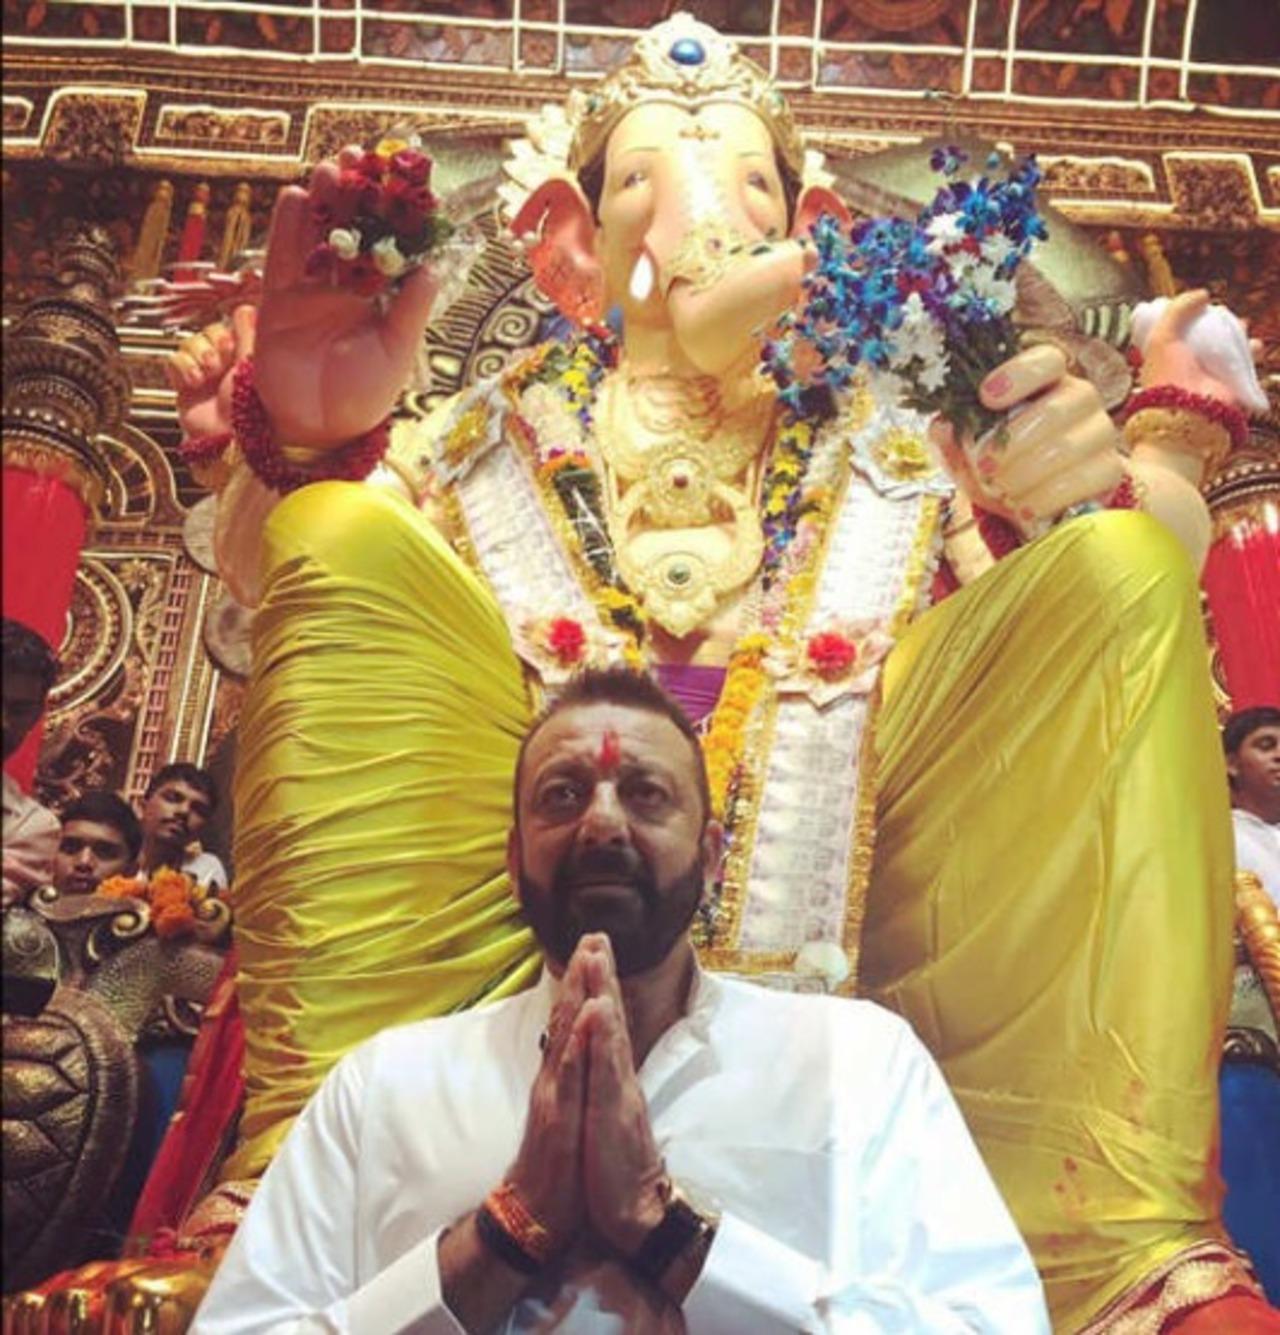 Sanjay Dutt visits Lalbaugcha Raja almost every year to offer prayers to Ganpati. He is an ardent devotee of Lord Shiva and Lord Ganesh